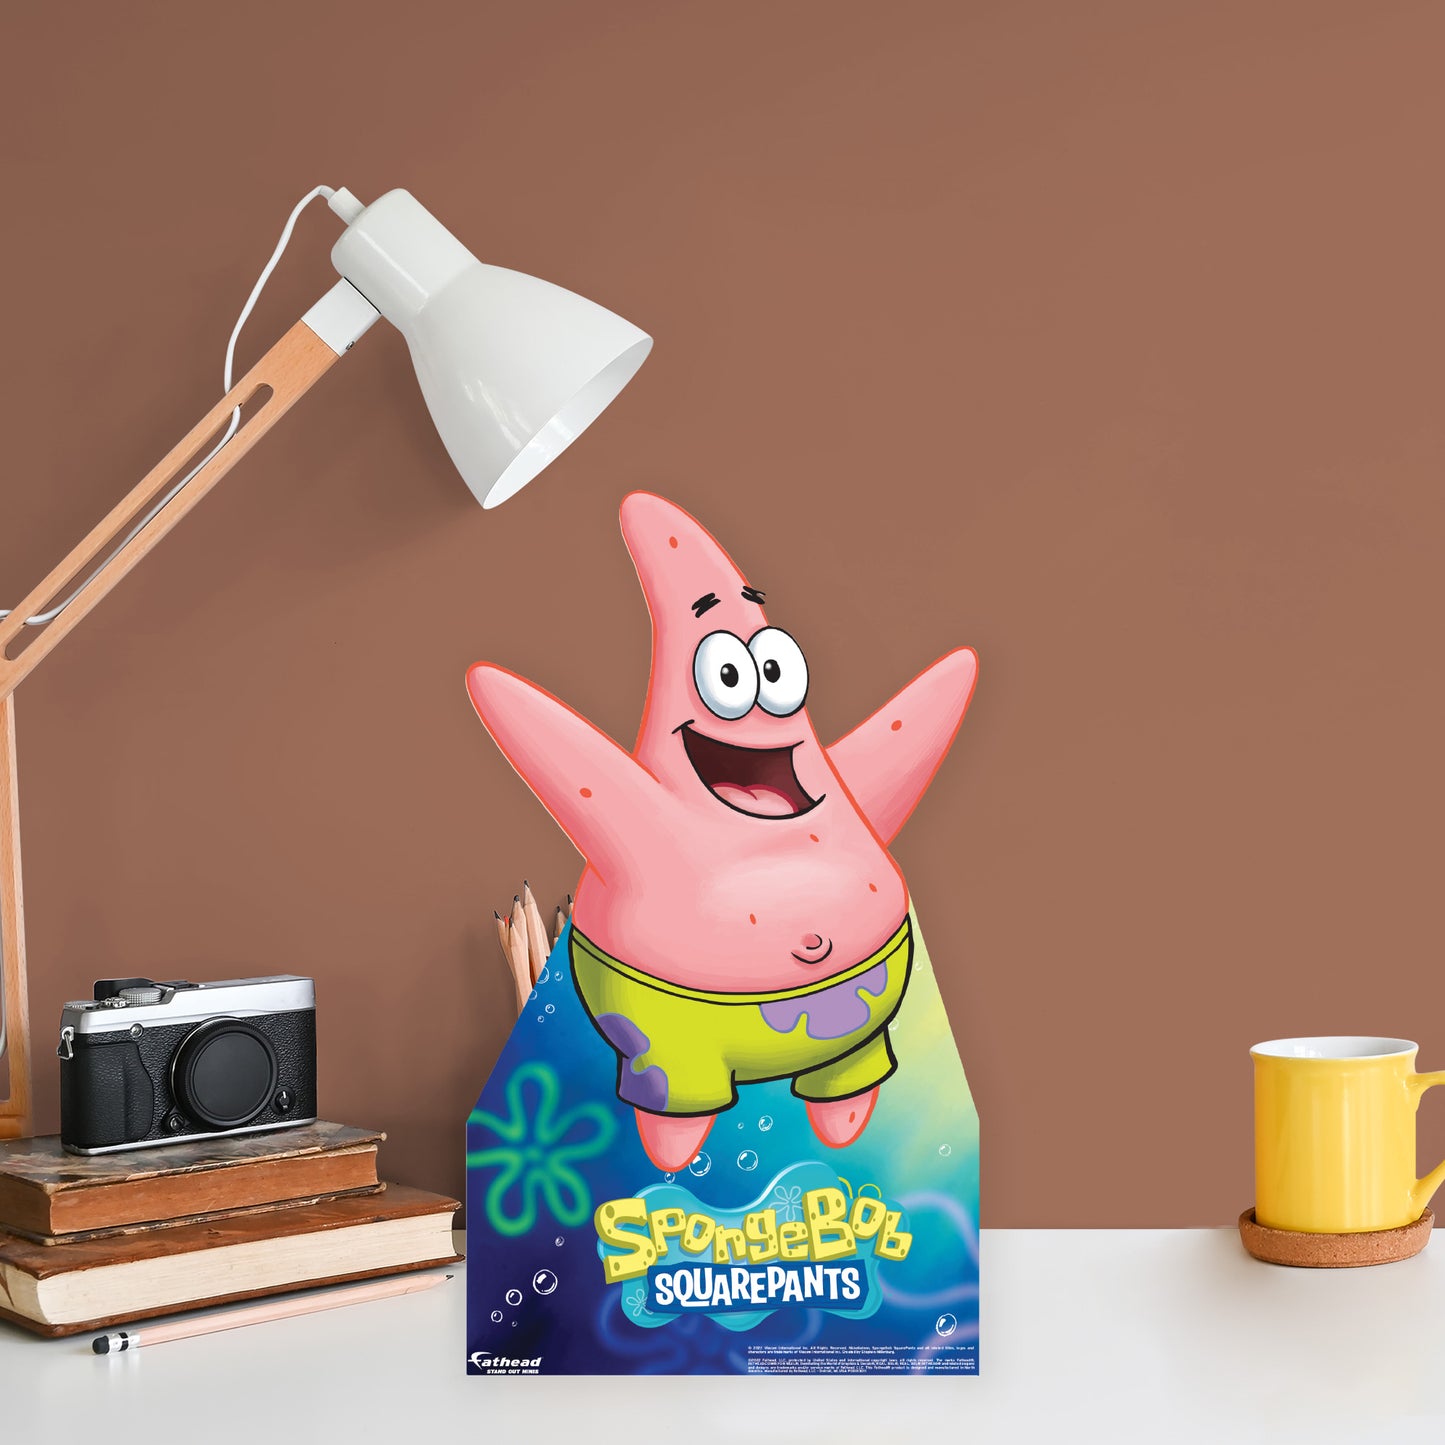 SpongeBob Squarepants: Patrick Mini   Cardstock Cutout  - Officially Licensed Nickelodeon    Stand Out